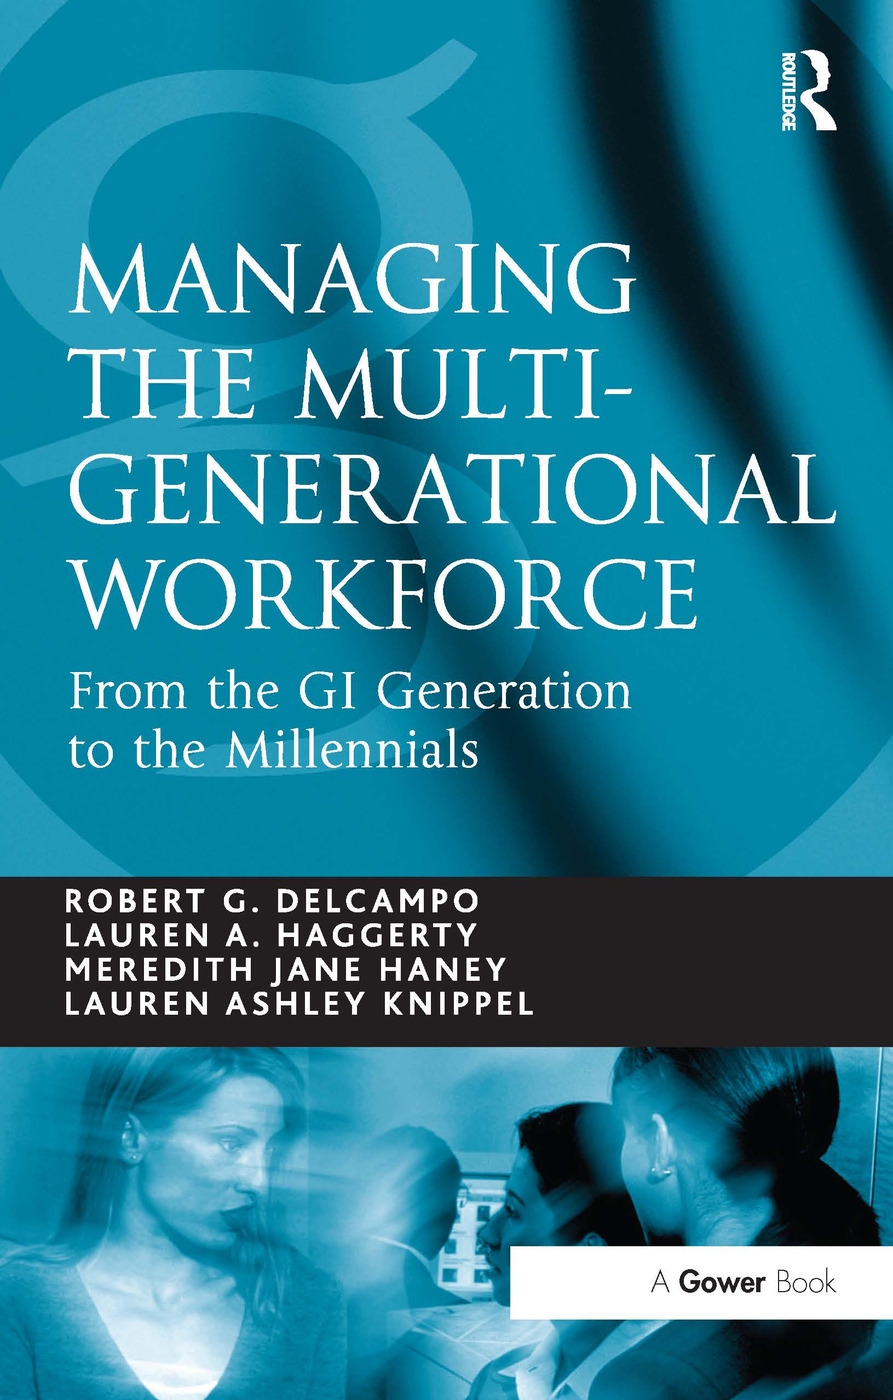 Managing the Multi-Generational Workforce: From the GI Generation to the Millennials